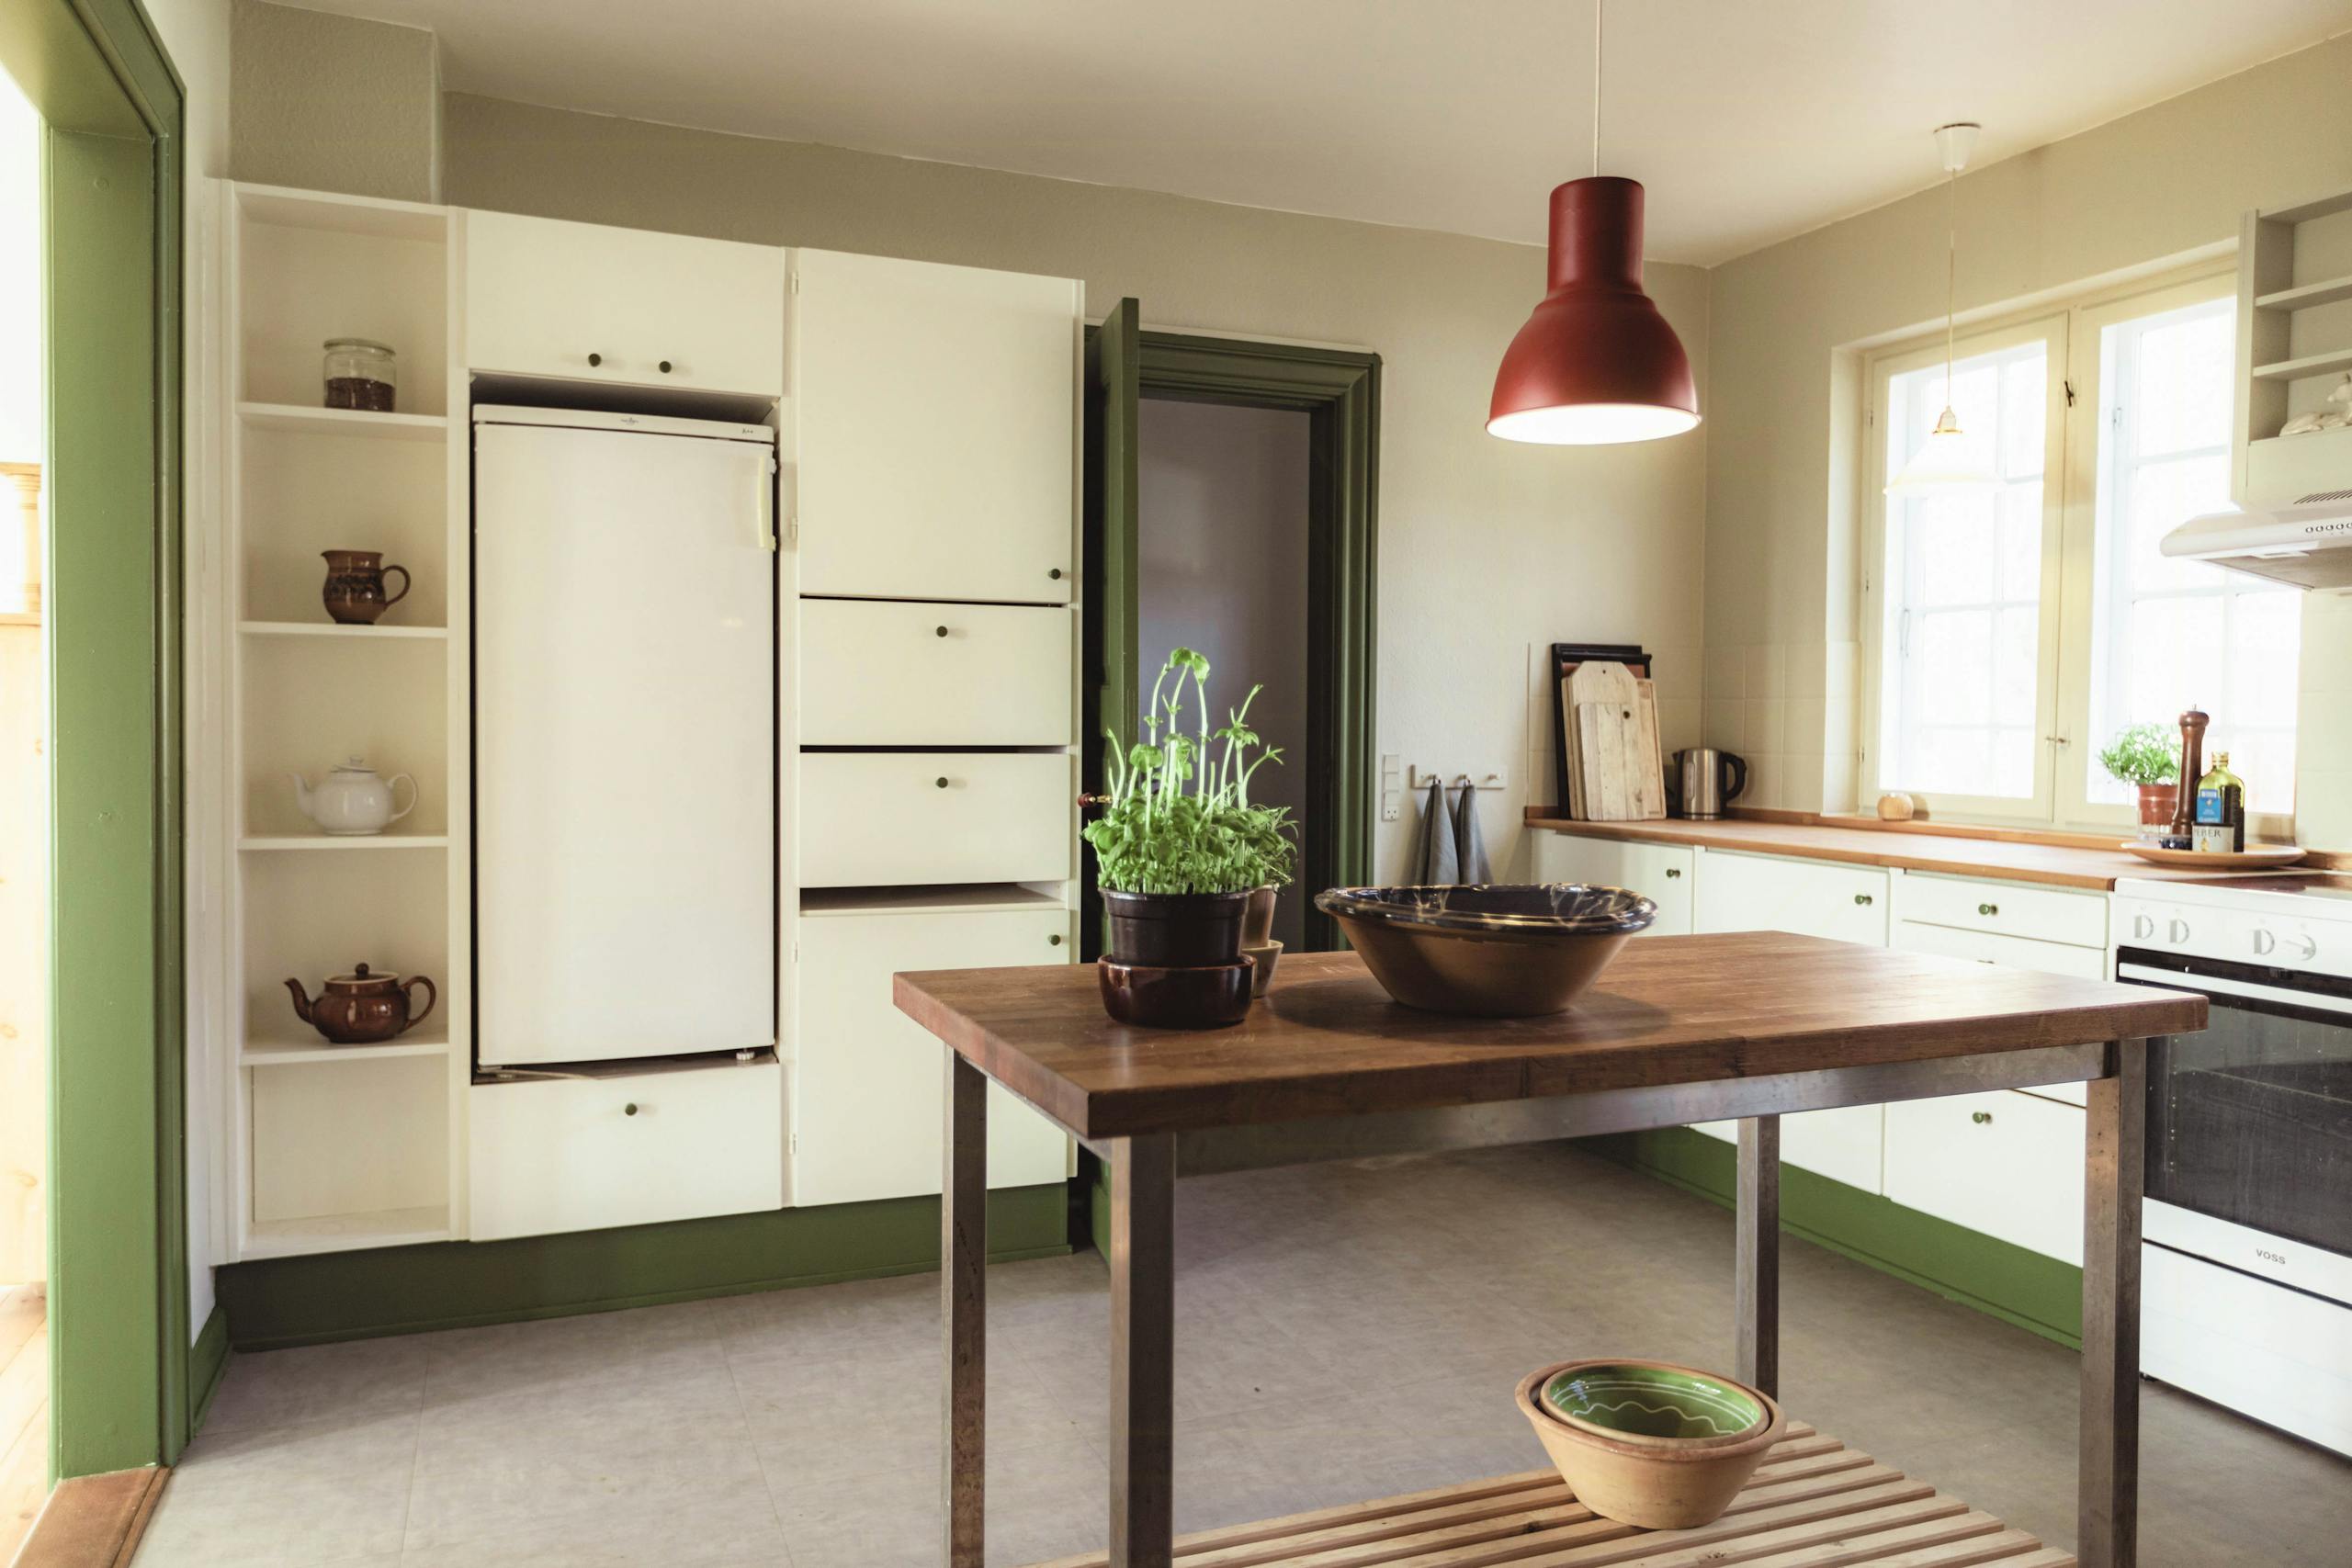 Transform the kitchen in your holiday home in 7 easy steps